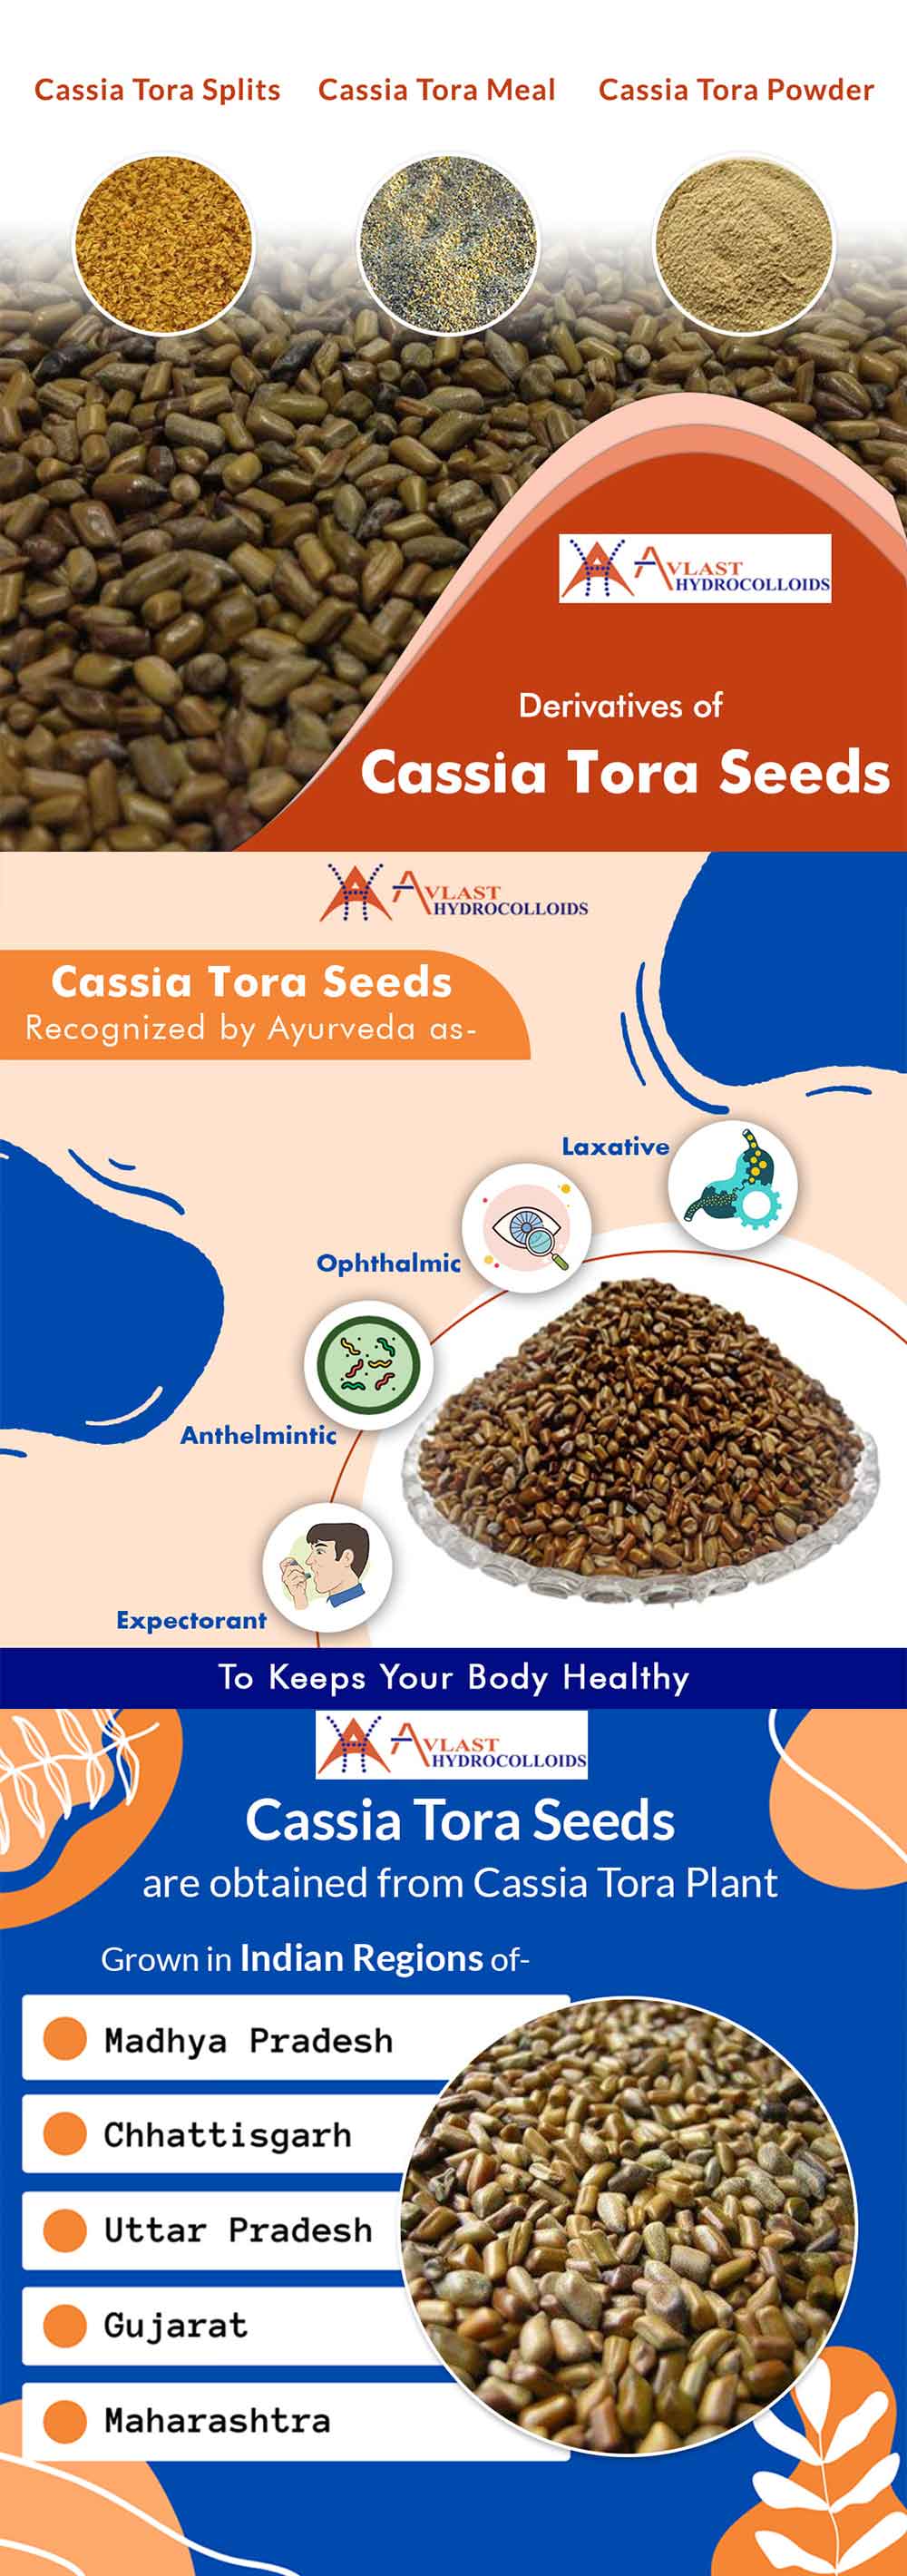 Cassia Tora Powder can be used in the treatment of various Ailments